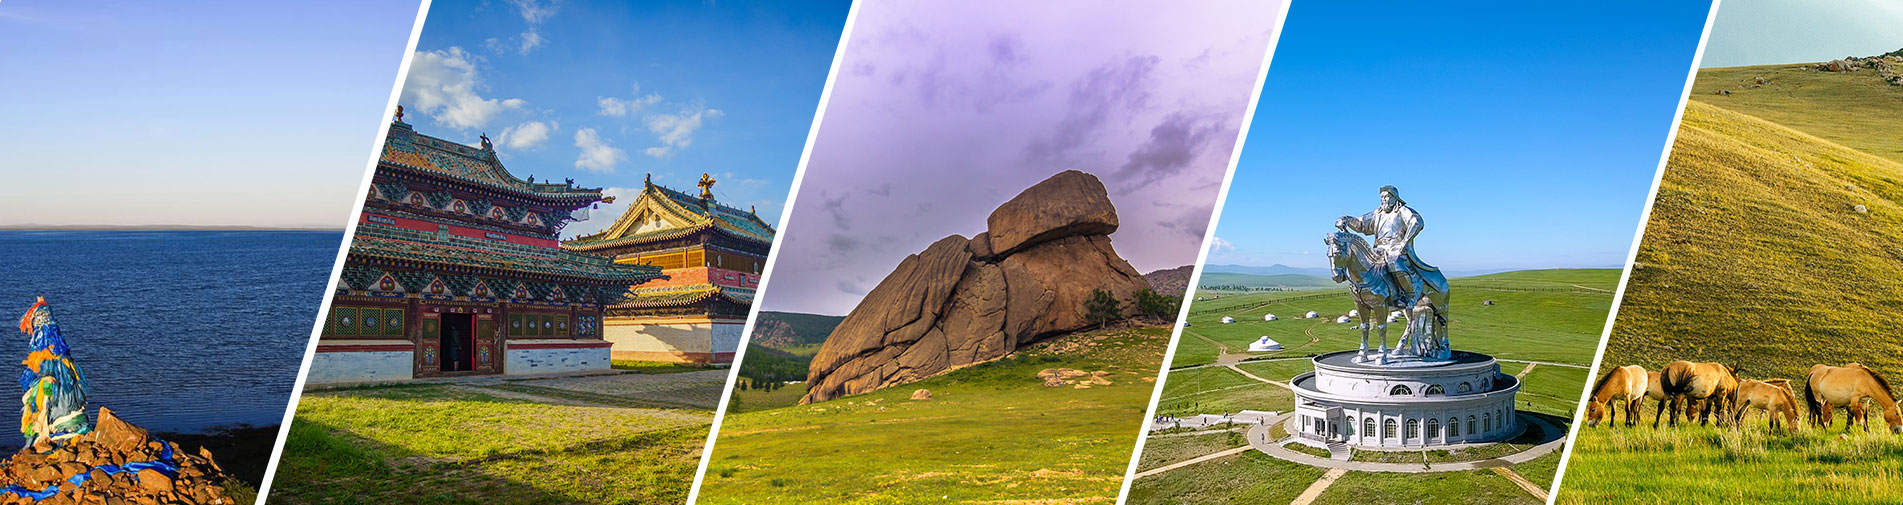 central-mongolia-highlights-tour-collage